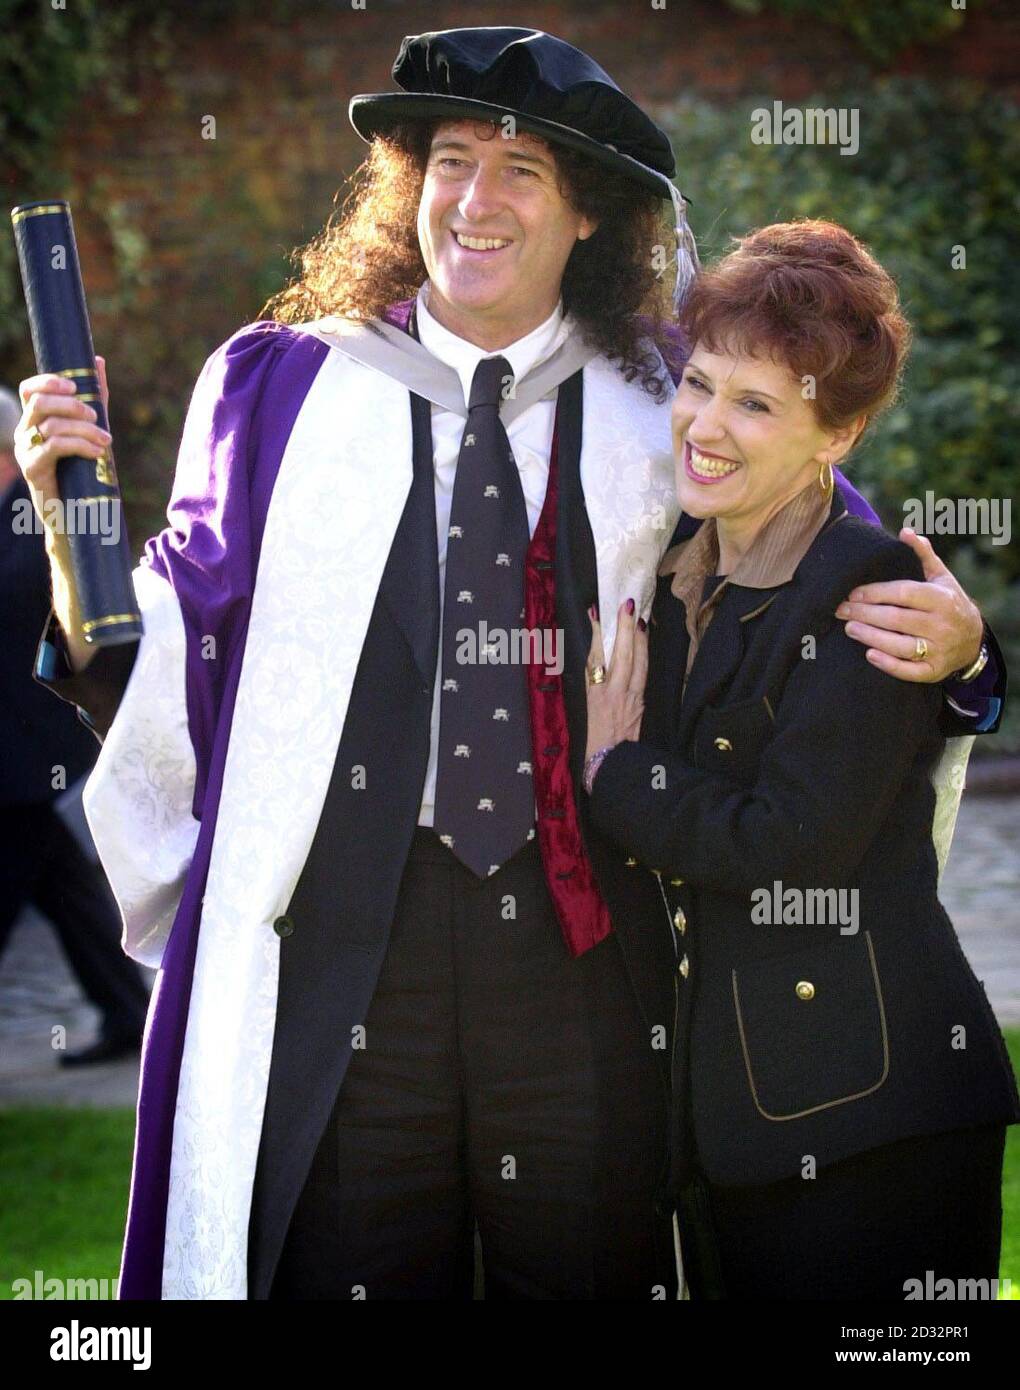 Queen guitarist and amateur astronomer Brian May with his wife, Anita Dobson, outside St Albans cathedral, after he was awarded an honorary Doctorate of Science by the University of Hertfordshire.    *  More famous now for guitars rather than stars, May, 55, was an accomplished astronomy student at Imperial College in London. He was working on his PhD when his rock star career took off and while he maintained a keen interest in astronomy he never finished the degree. Stock Photo